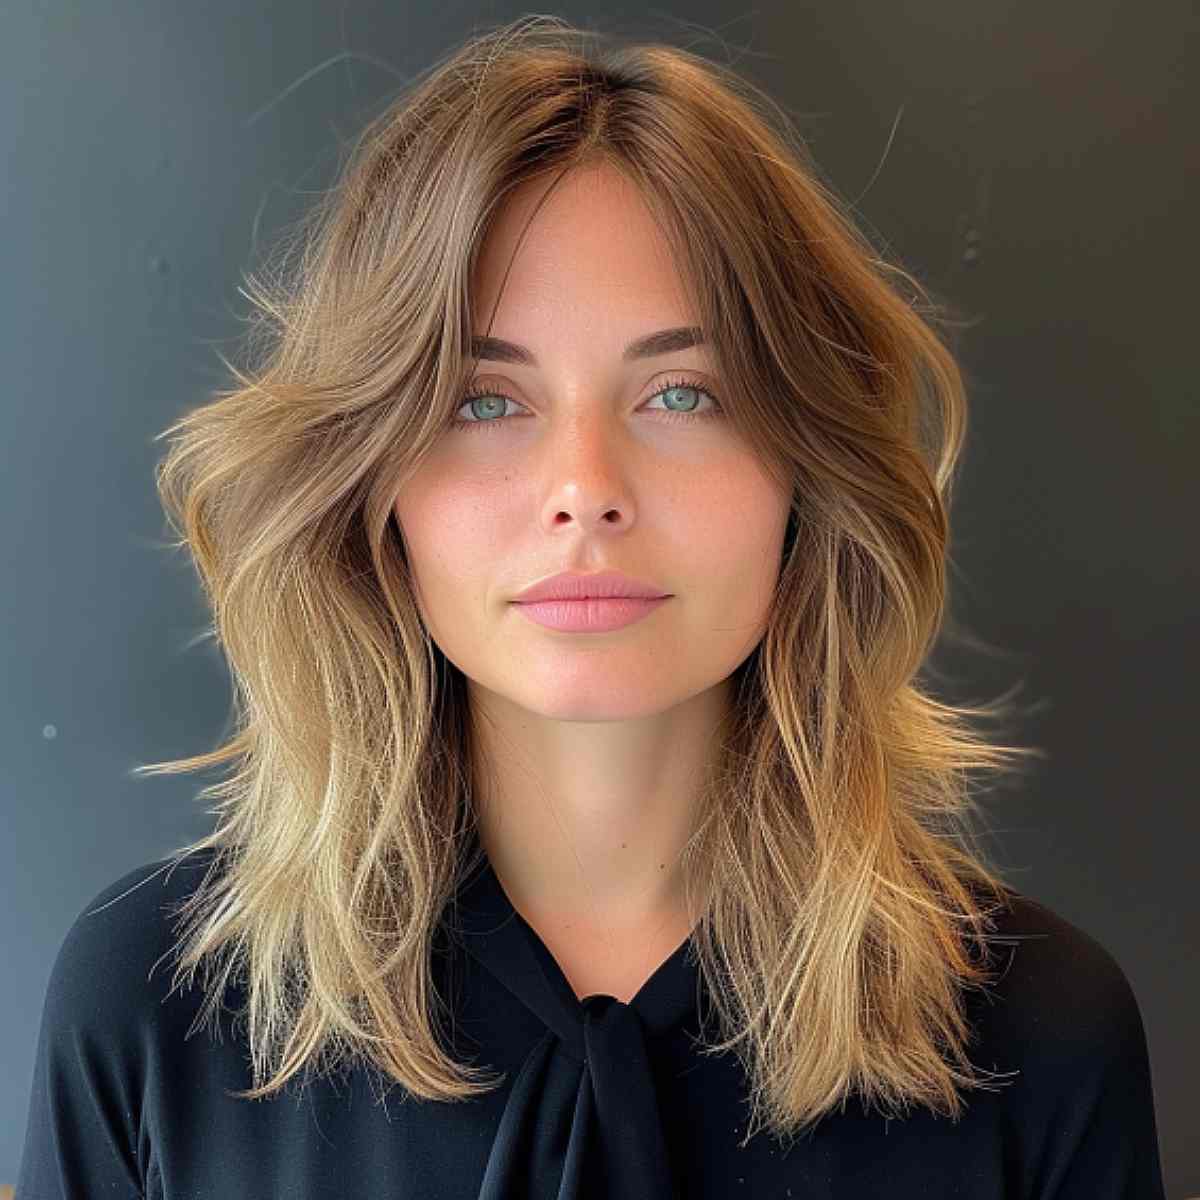 Medium messy layered hairstyle to flatter square face shapes